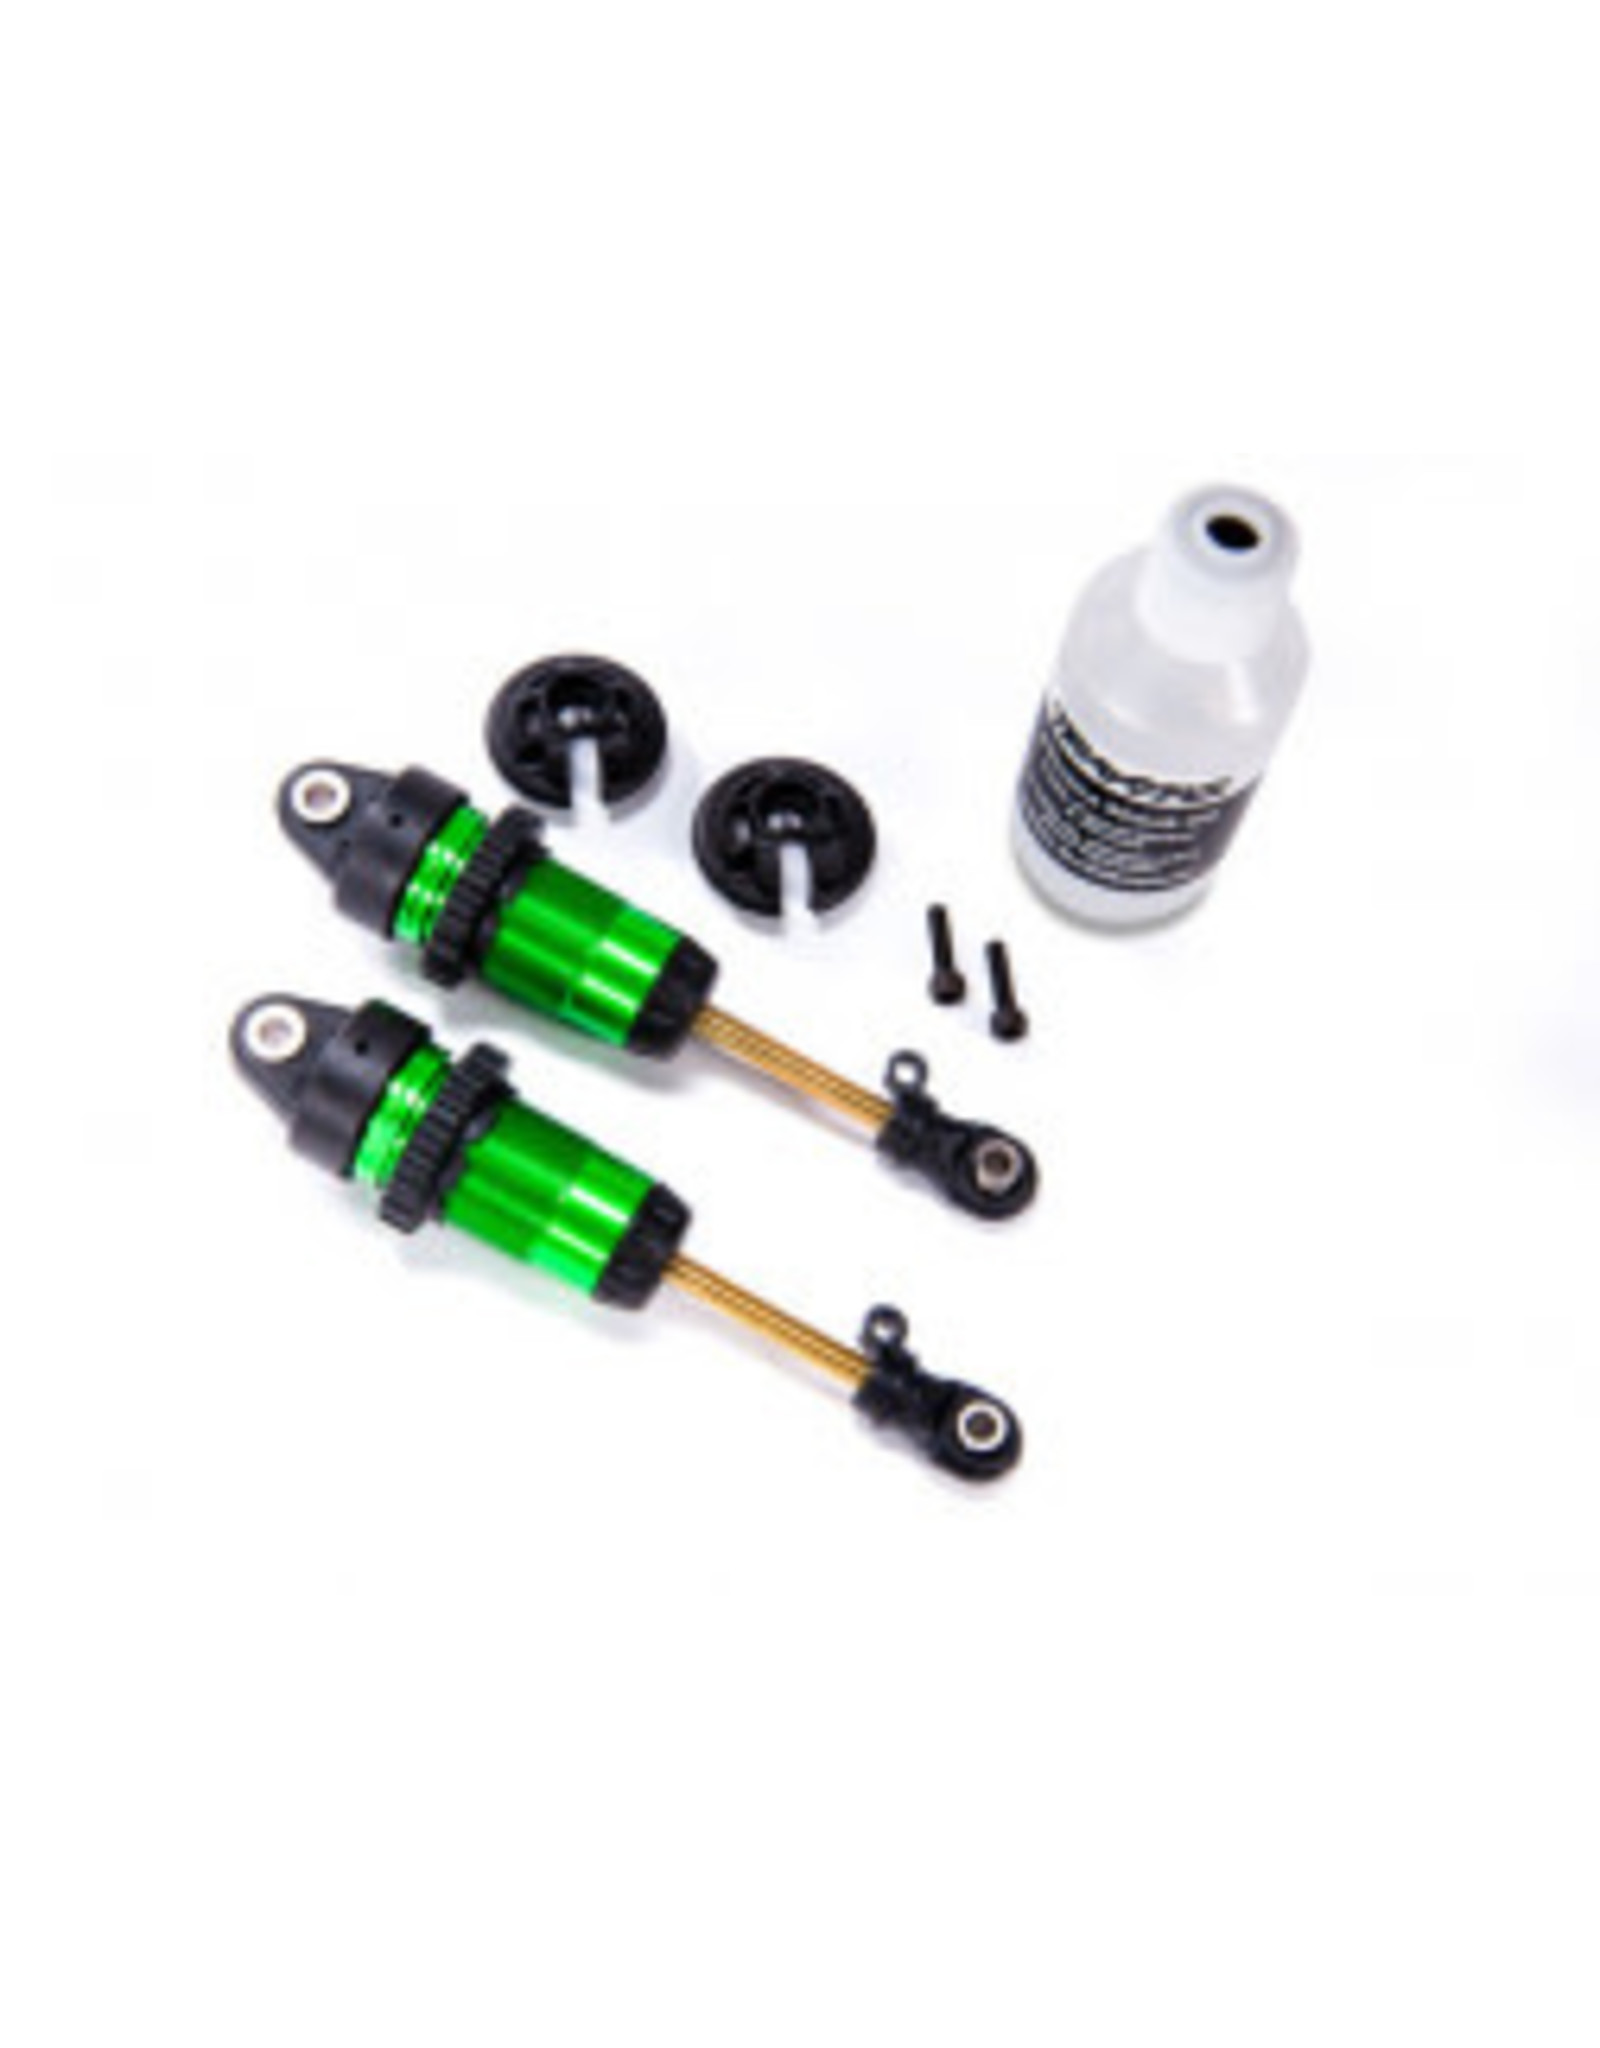 Traxxas [Shocks, GTR long green-anodized, PTFE-coated bodies with TiN shafts (fully assembled, without springs) (2)] Shocks, GTR long green-anodized, PTFE-coated bodies with TiN shafts (fully assembled, without springs) (2)